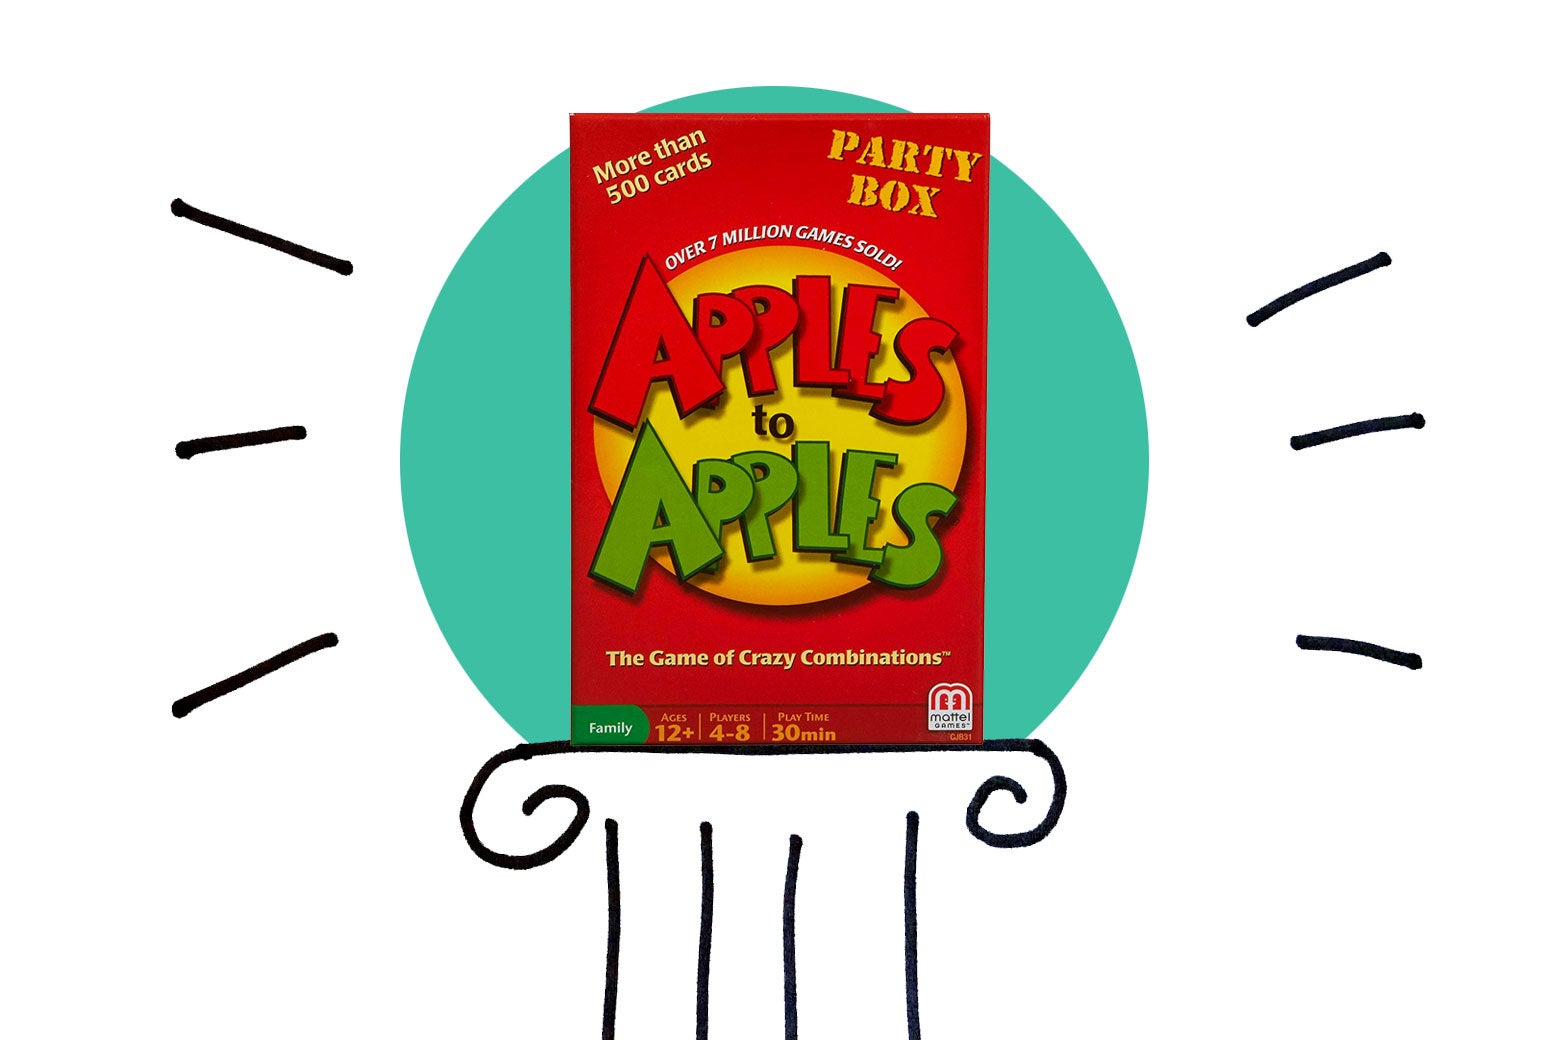 Apples to Apples on an illustrated pedestal